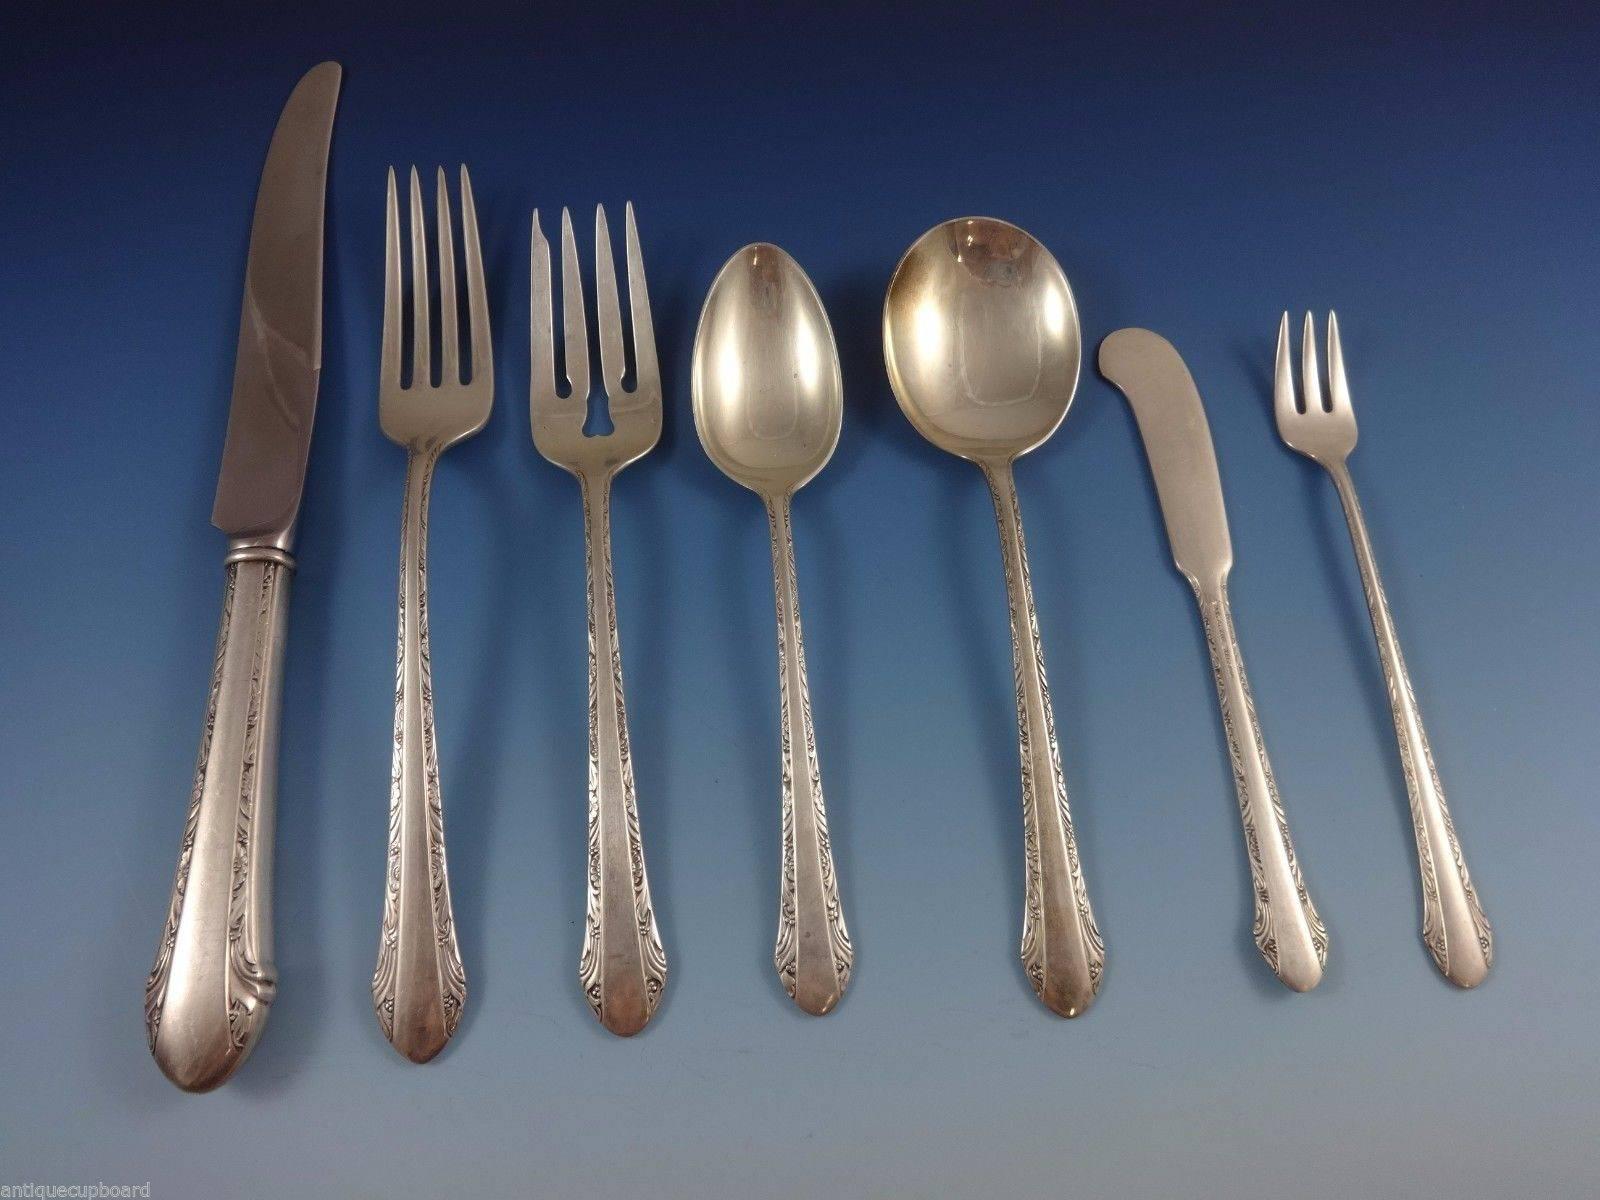 Chased Romantique by Alvin sterling silver flatware set of 68 pieces. This set includes:
Eight knives, 9